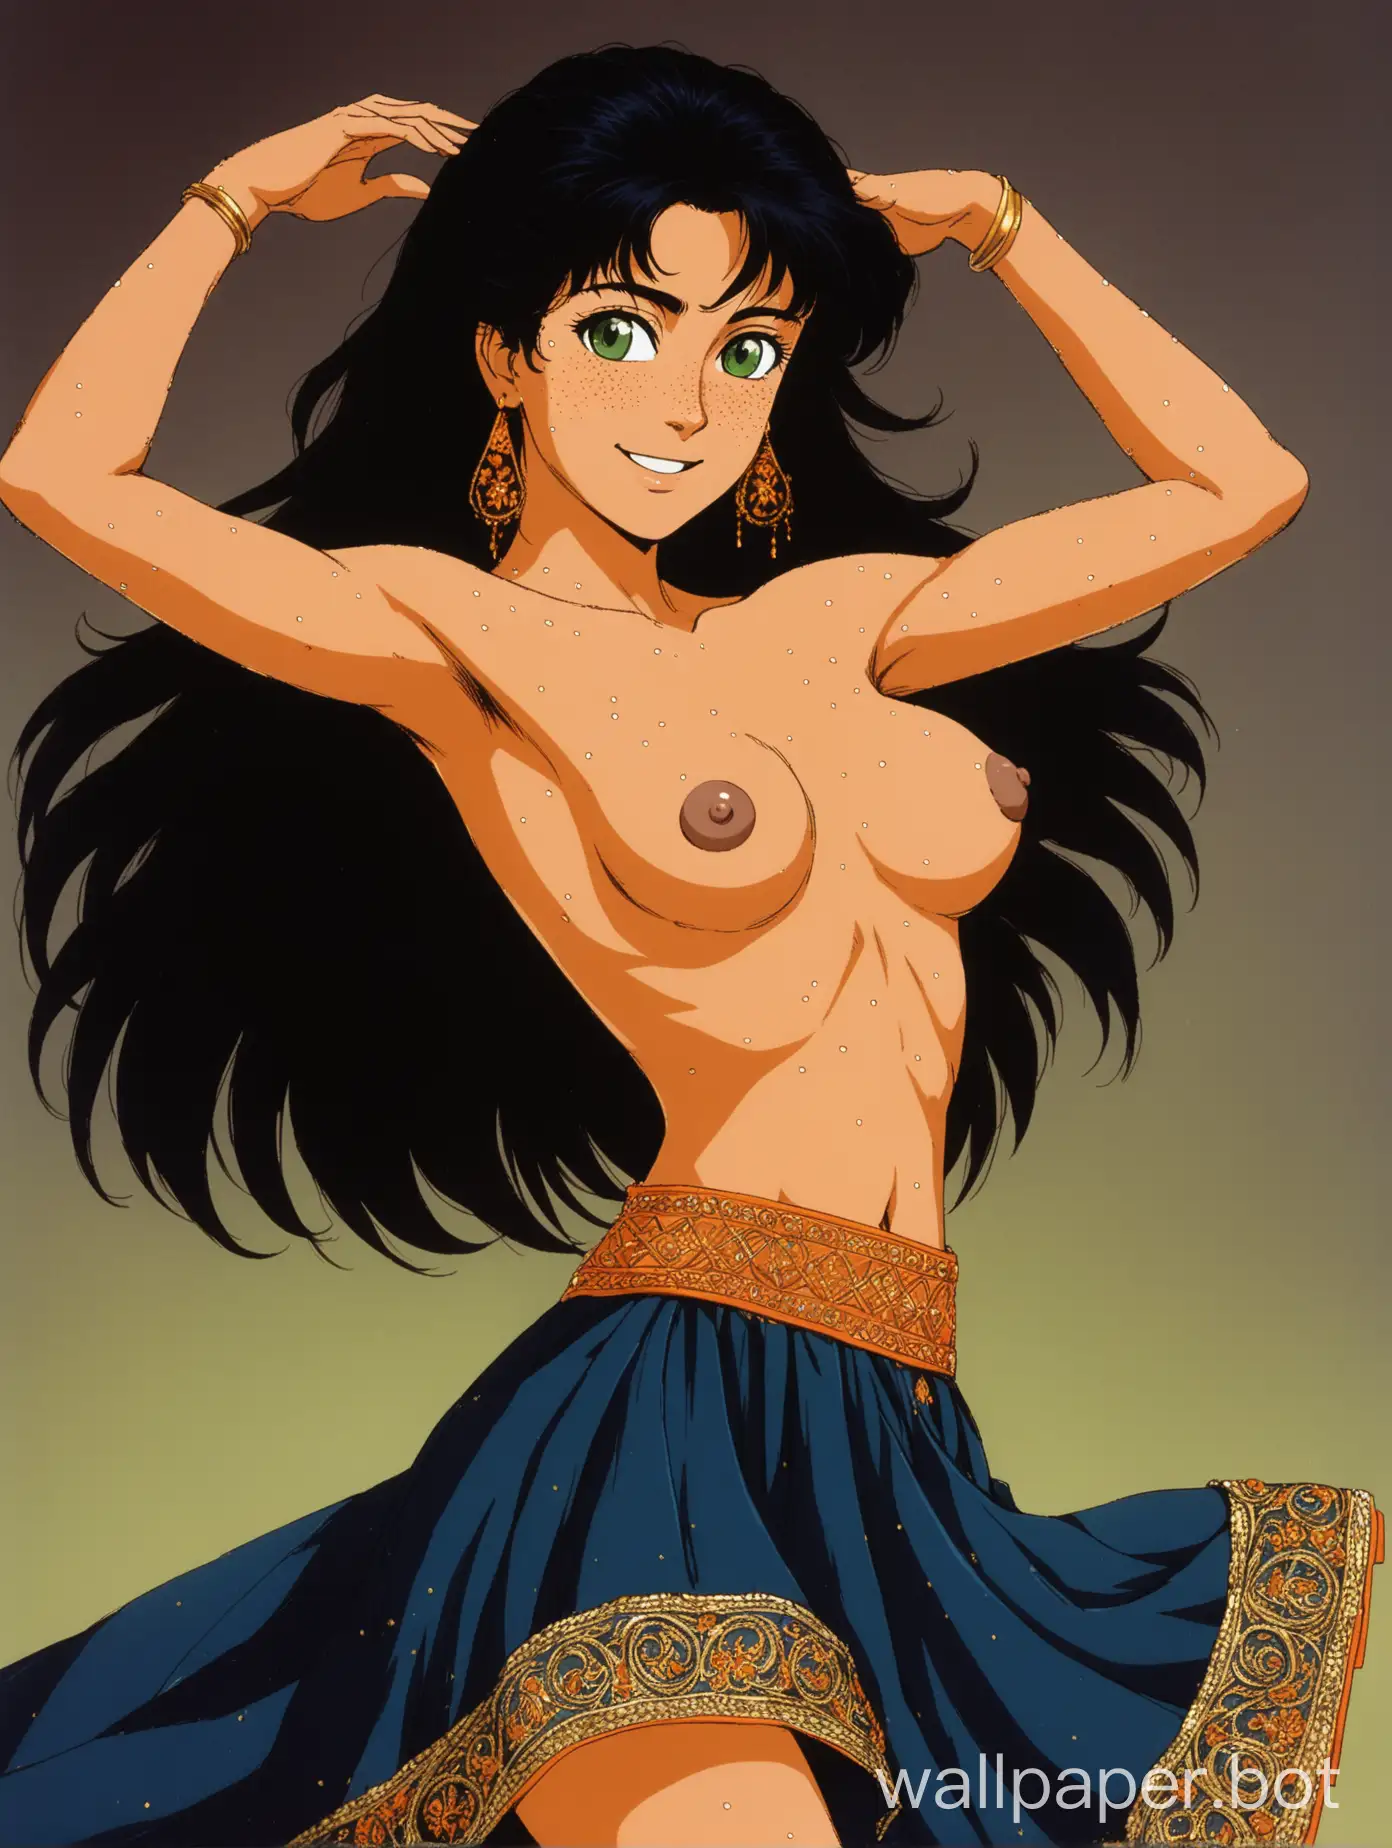 portrait of a young Syrian woman dancing topless, exposed breasts, she is pretty, topless, cute breasts, dark brown nipples, freckled chest, smiling, she has green eyes, she has olive skin, she has lots of freckles, midriff, she has long flowing fluffy jet-black hair, elegant, wearing a long orange and dark blue skirt, gold embroidery, midriff, 1980s retro anime